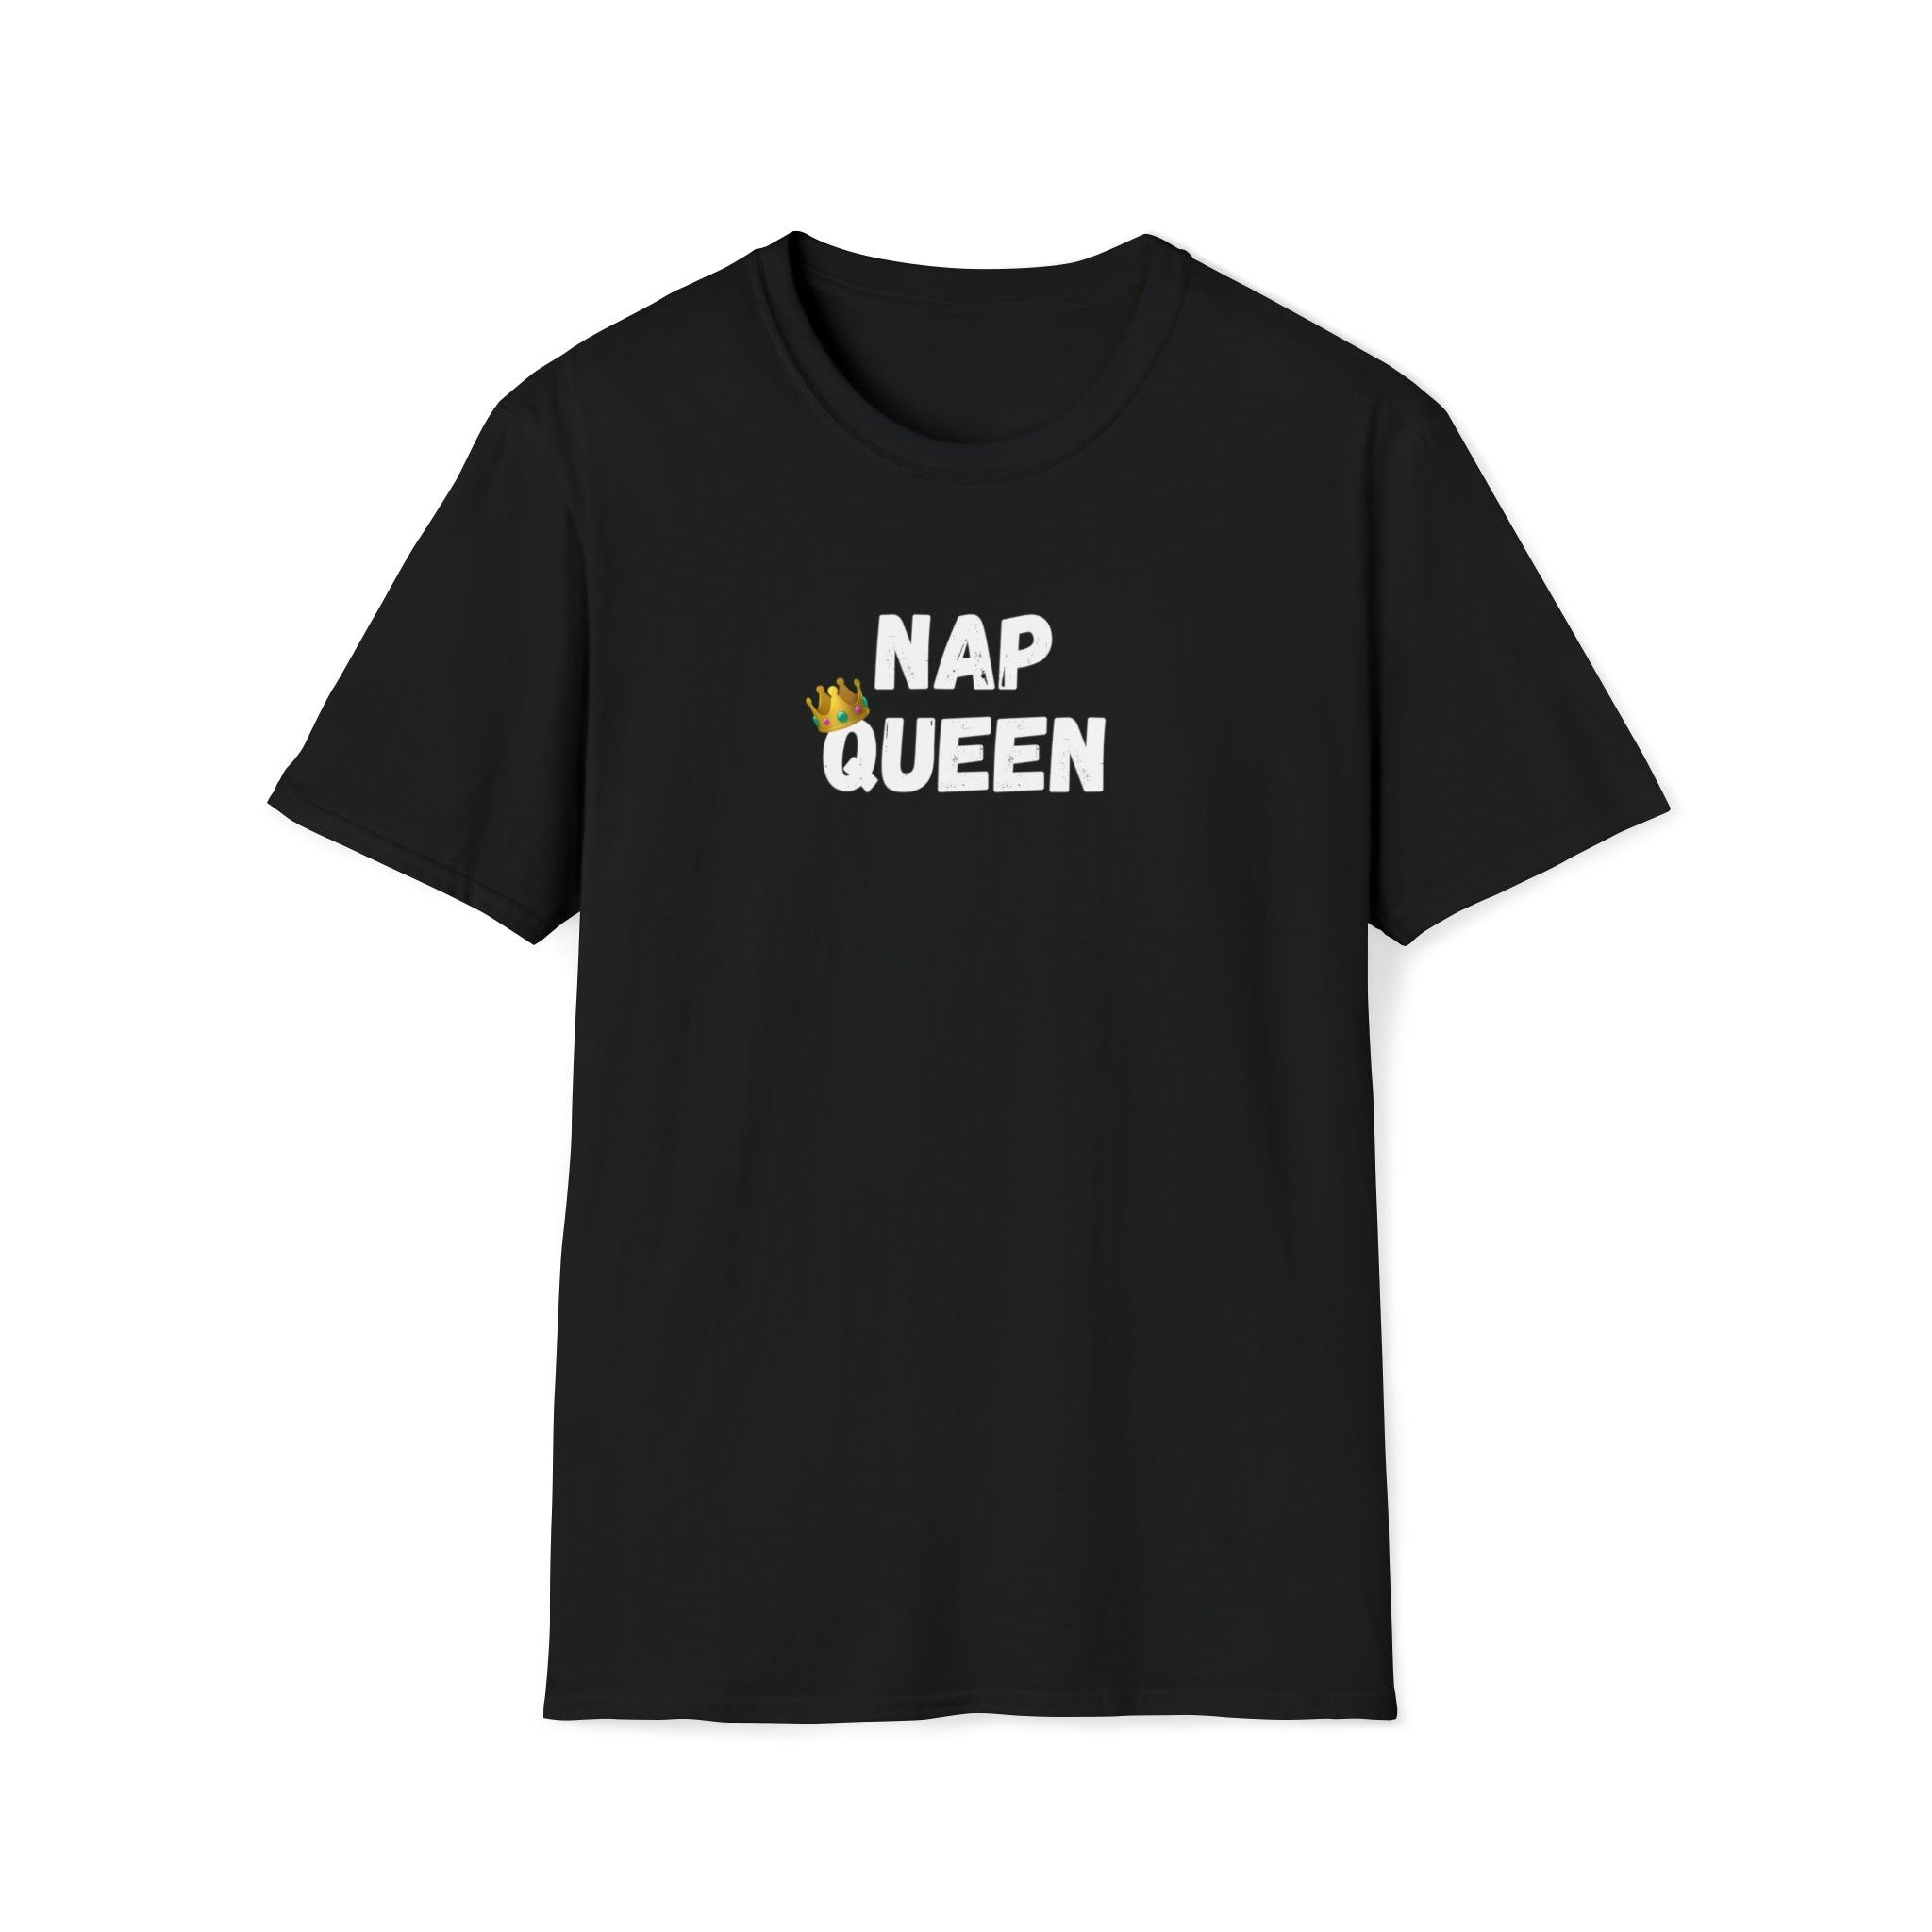 Woman wearing a funny Nap Queen shirt in black to demonstrate how cozy and comfortable the tee is.